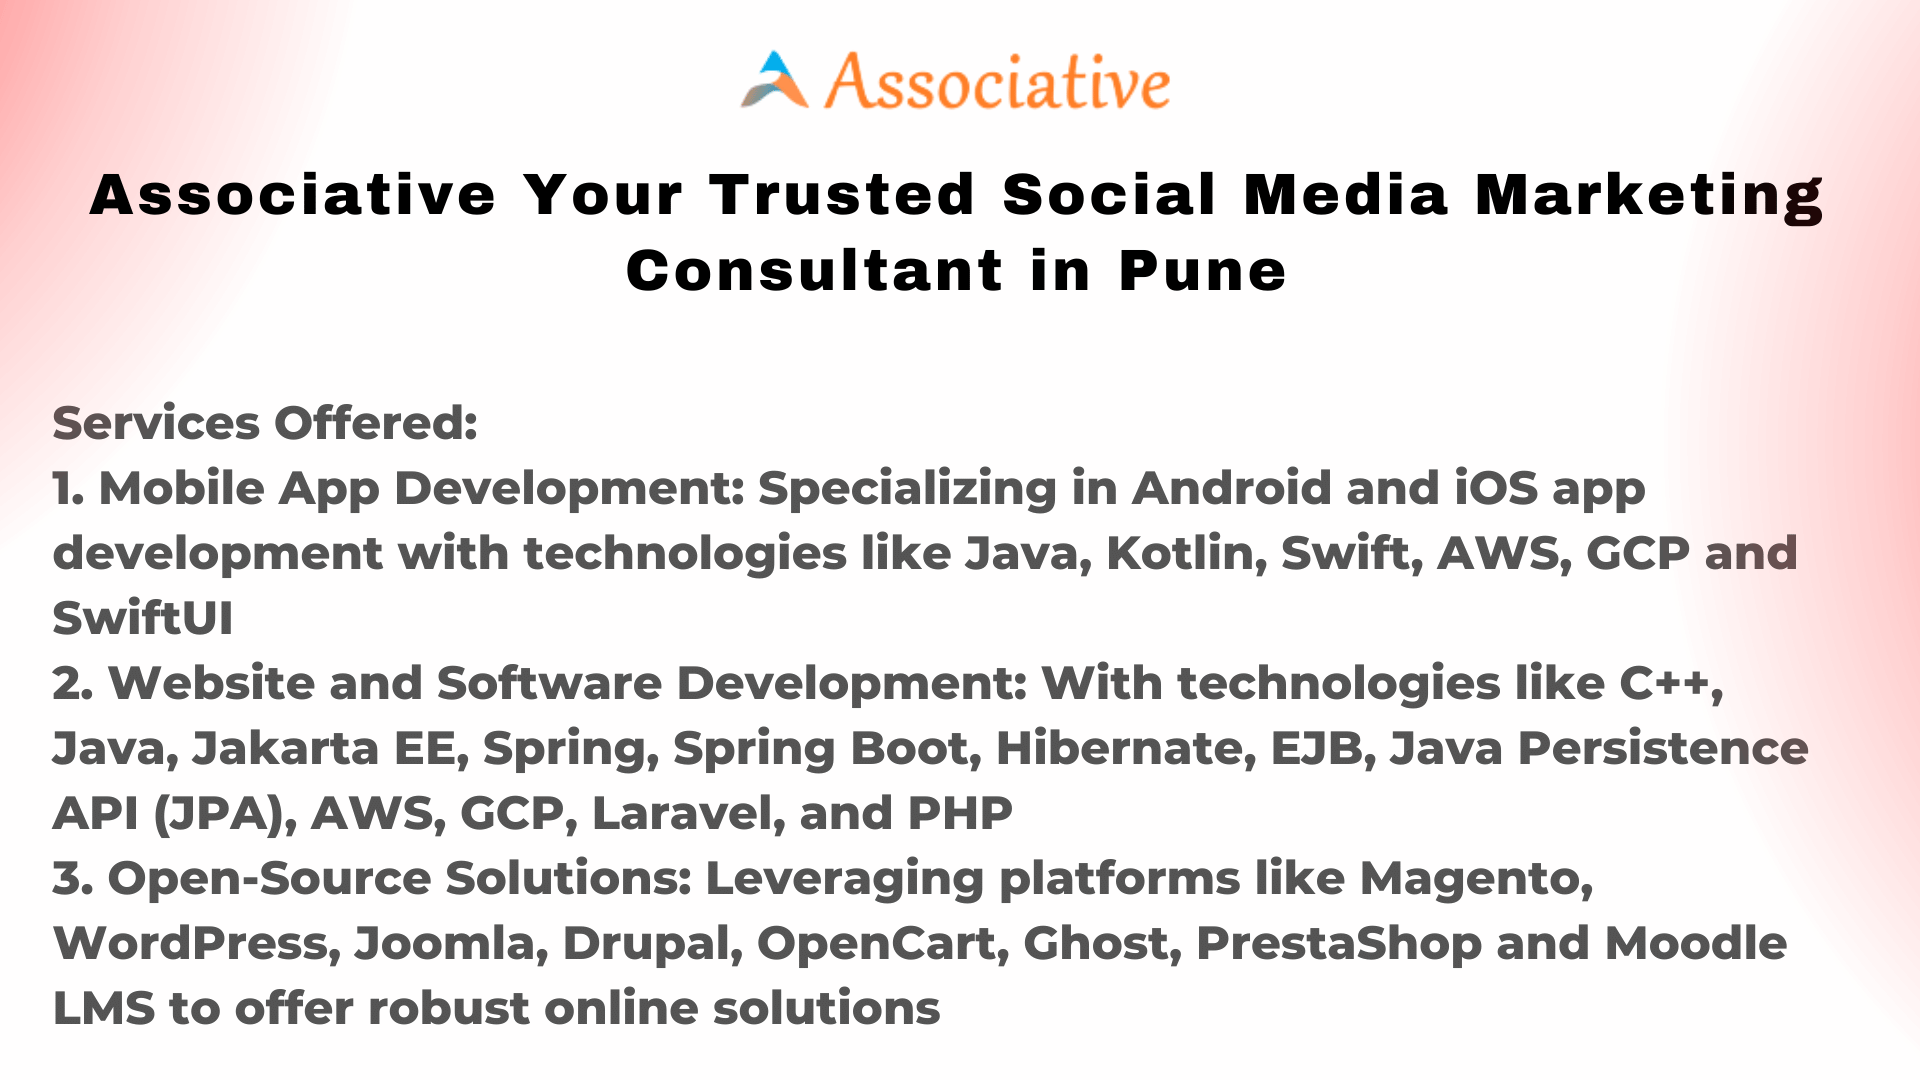 Associative Your Trusted Social Media Marketing Consultant in Pune